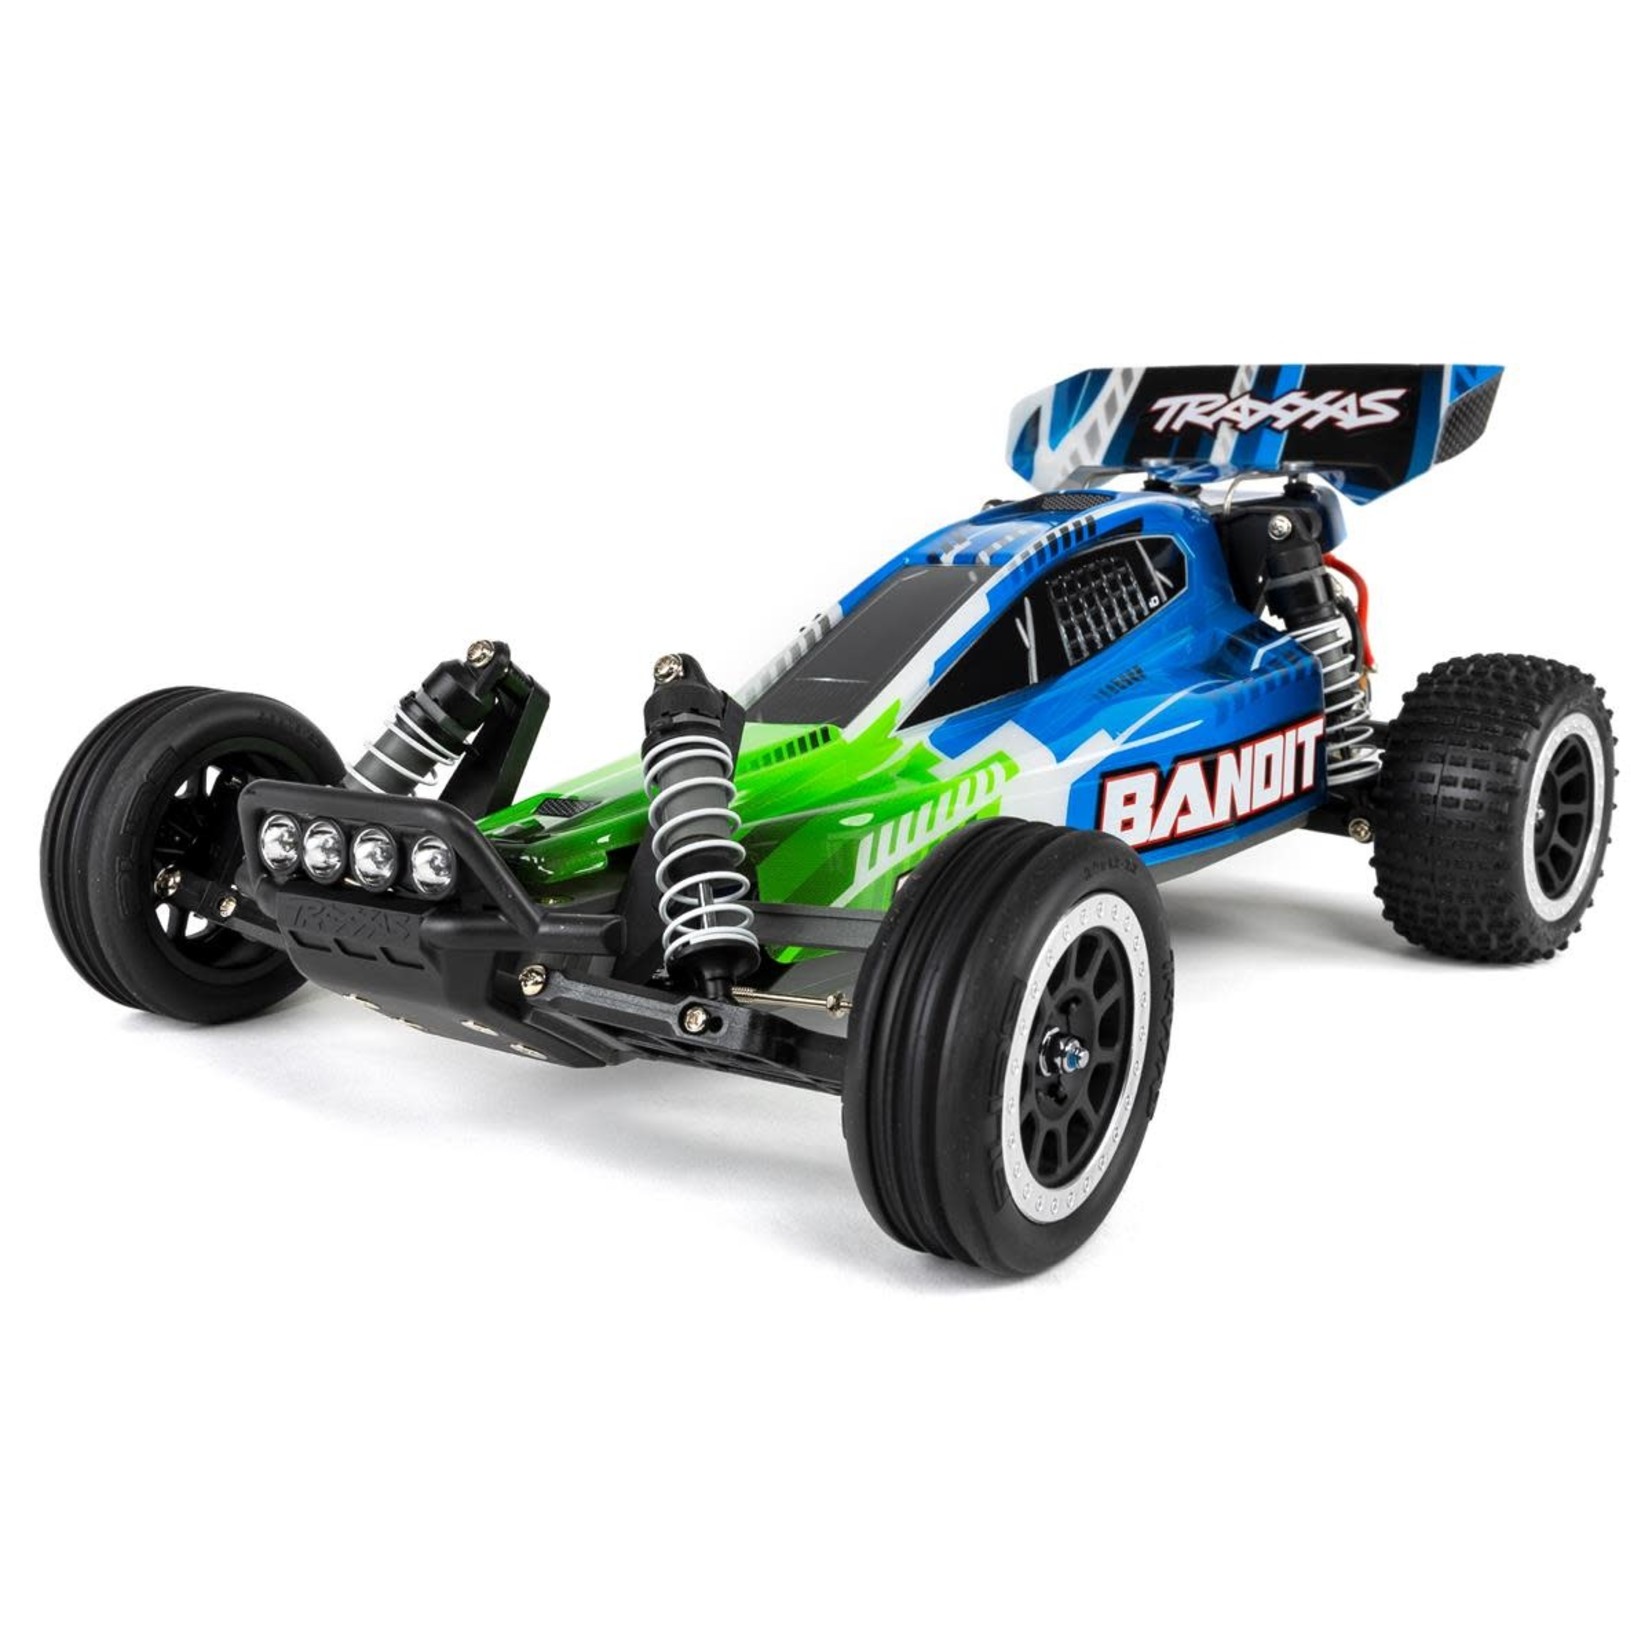 Traxxas Traxxas Bandit 1/10 RTR 2WD Electric Buggy w/LED Lights (Green) w/XL-5 ESC, TQ 2.4GHz Radio, Battery & DC Charger #24054-61-GRN